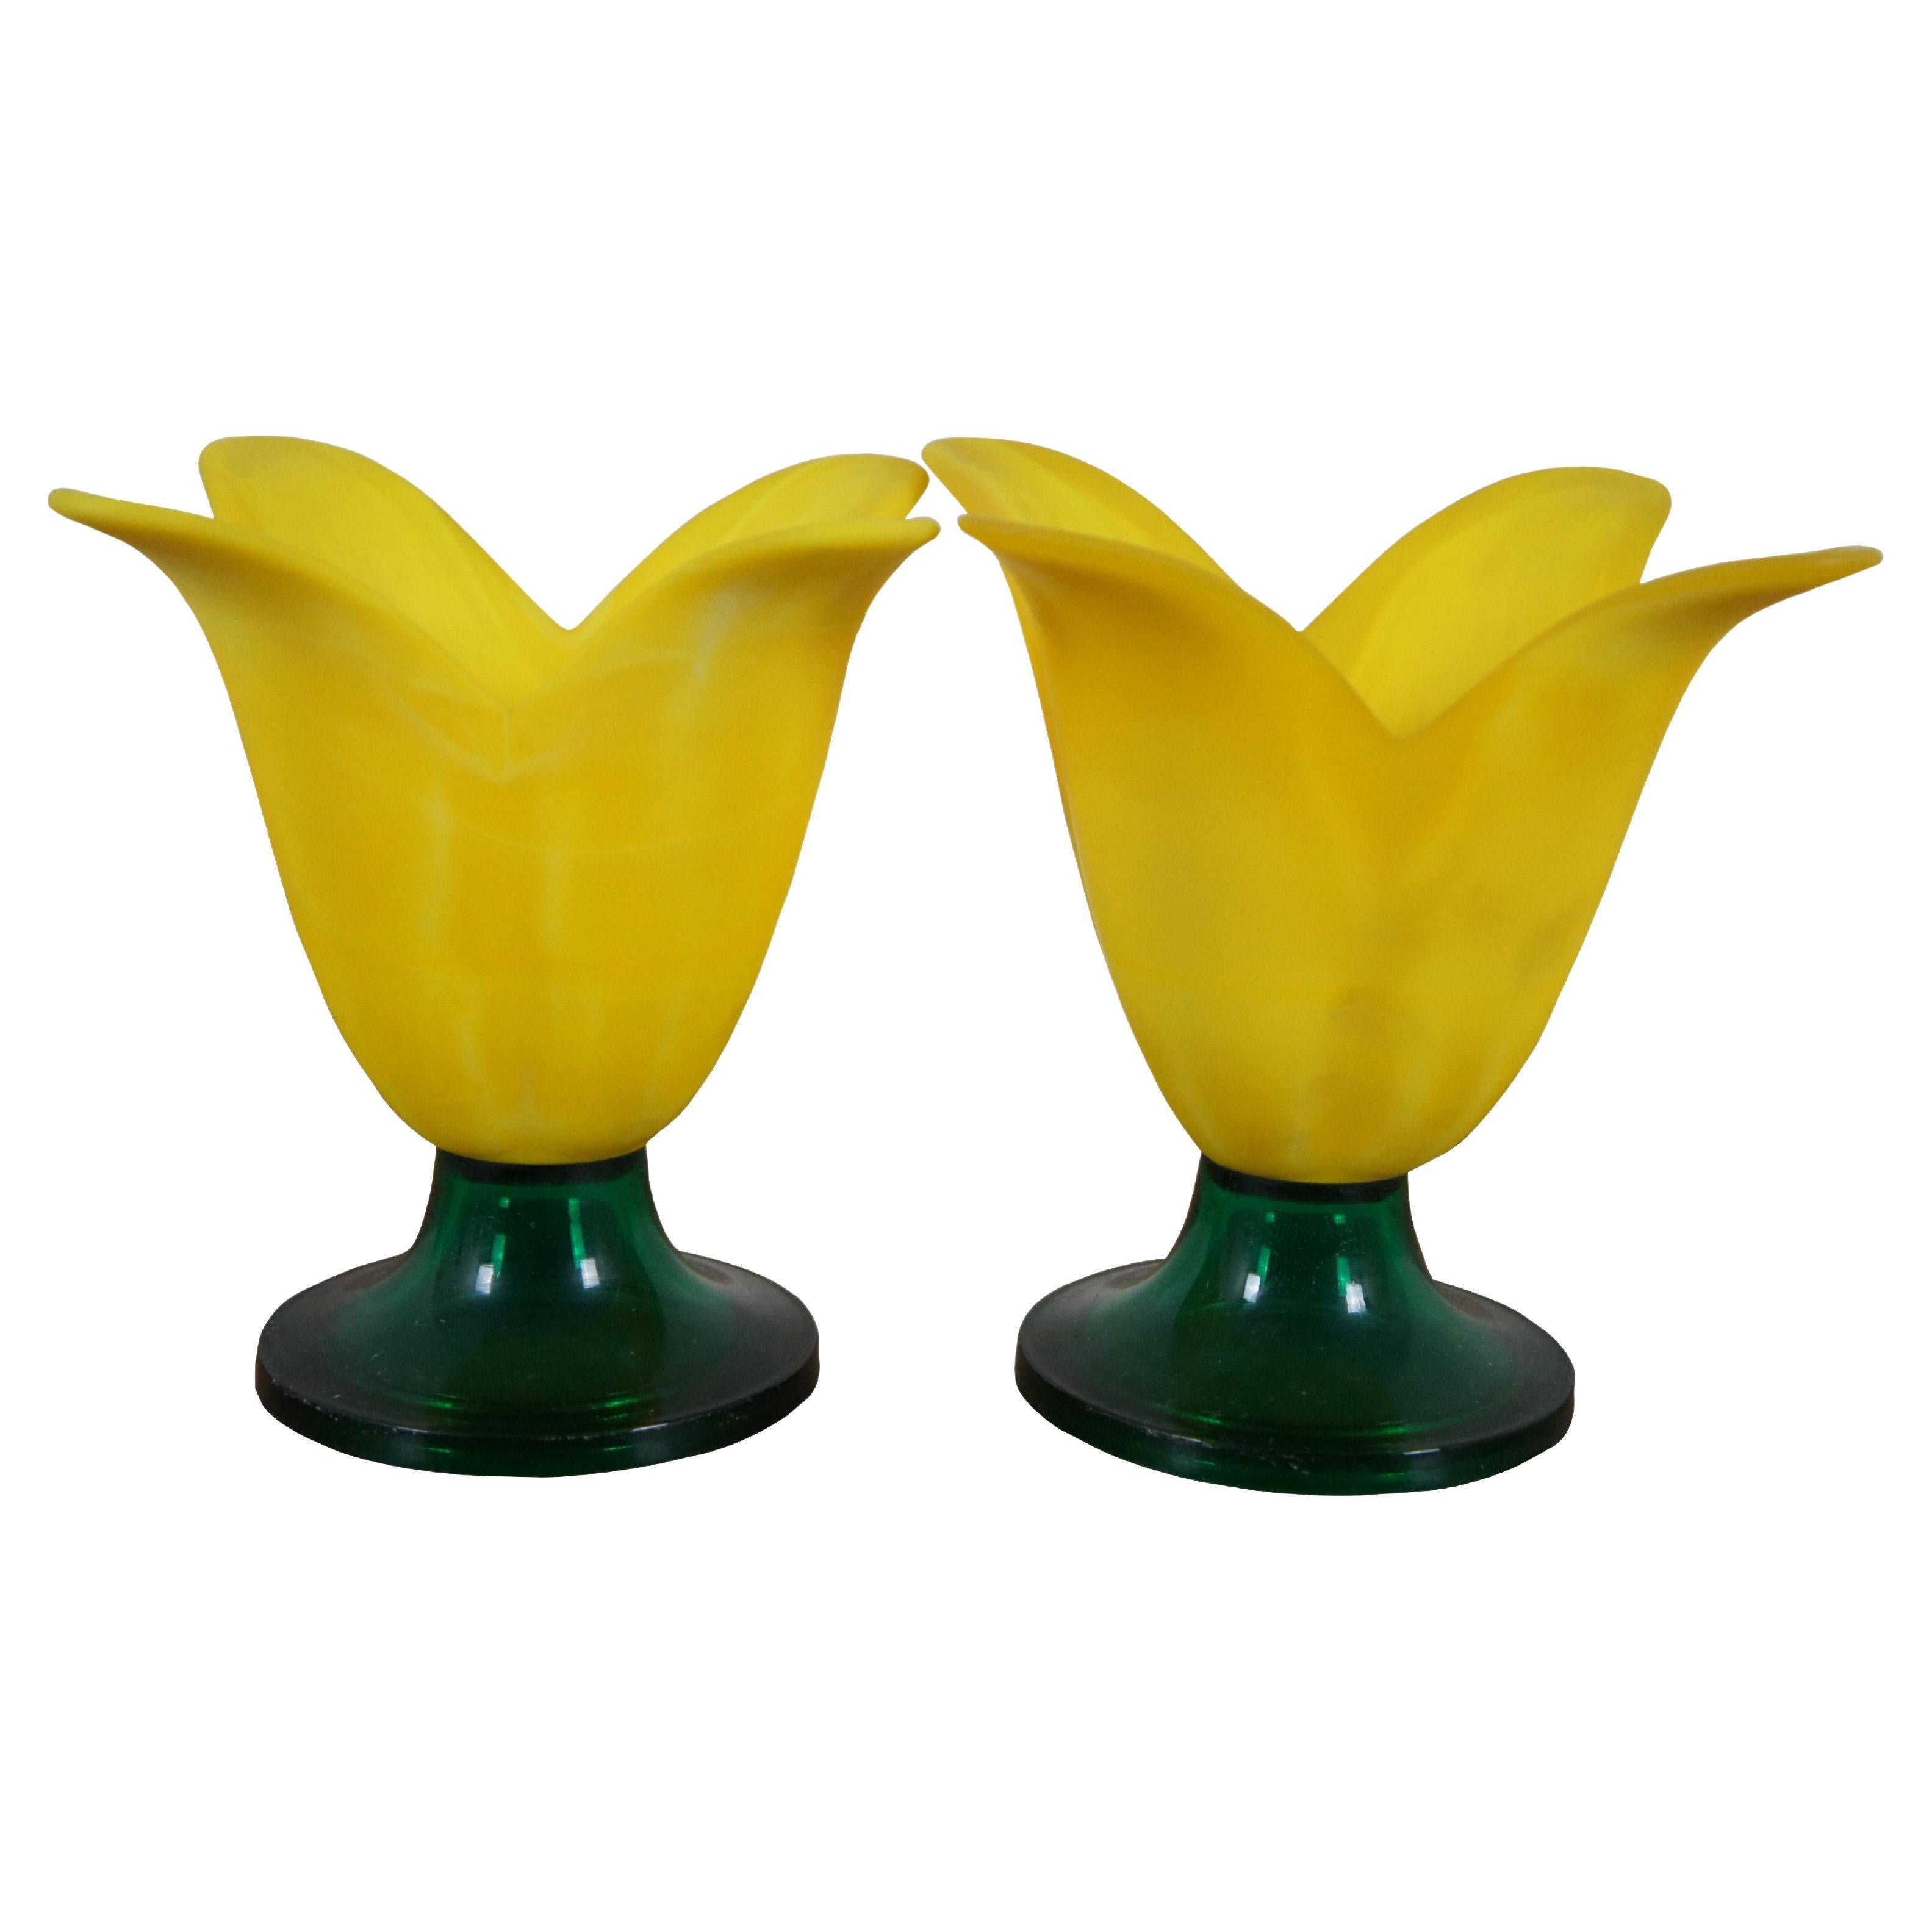 2 Studio Nova Portugal Yellow Frosted Glass Tulip Daffodil Votive Candle Holders